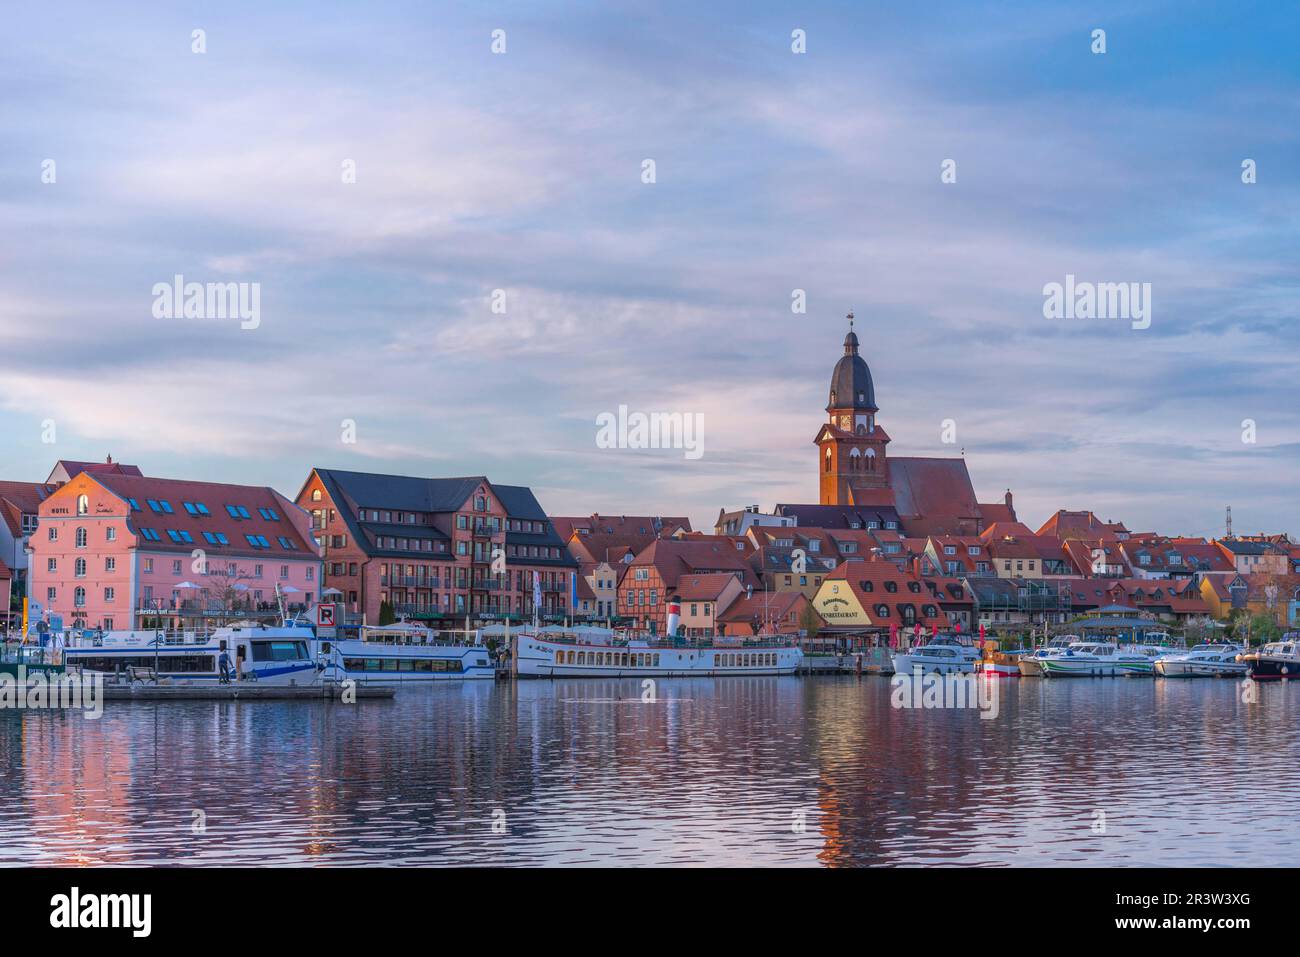 City harbour with motor boats, Waren, St. Georgen church, evening light, sky, water reflection, old town, redevelopment, historic excursion steamer Stock Photo